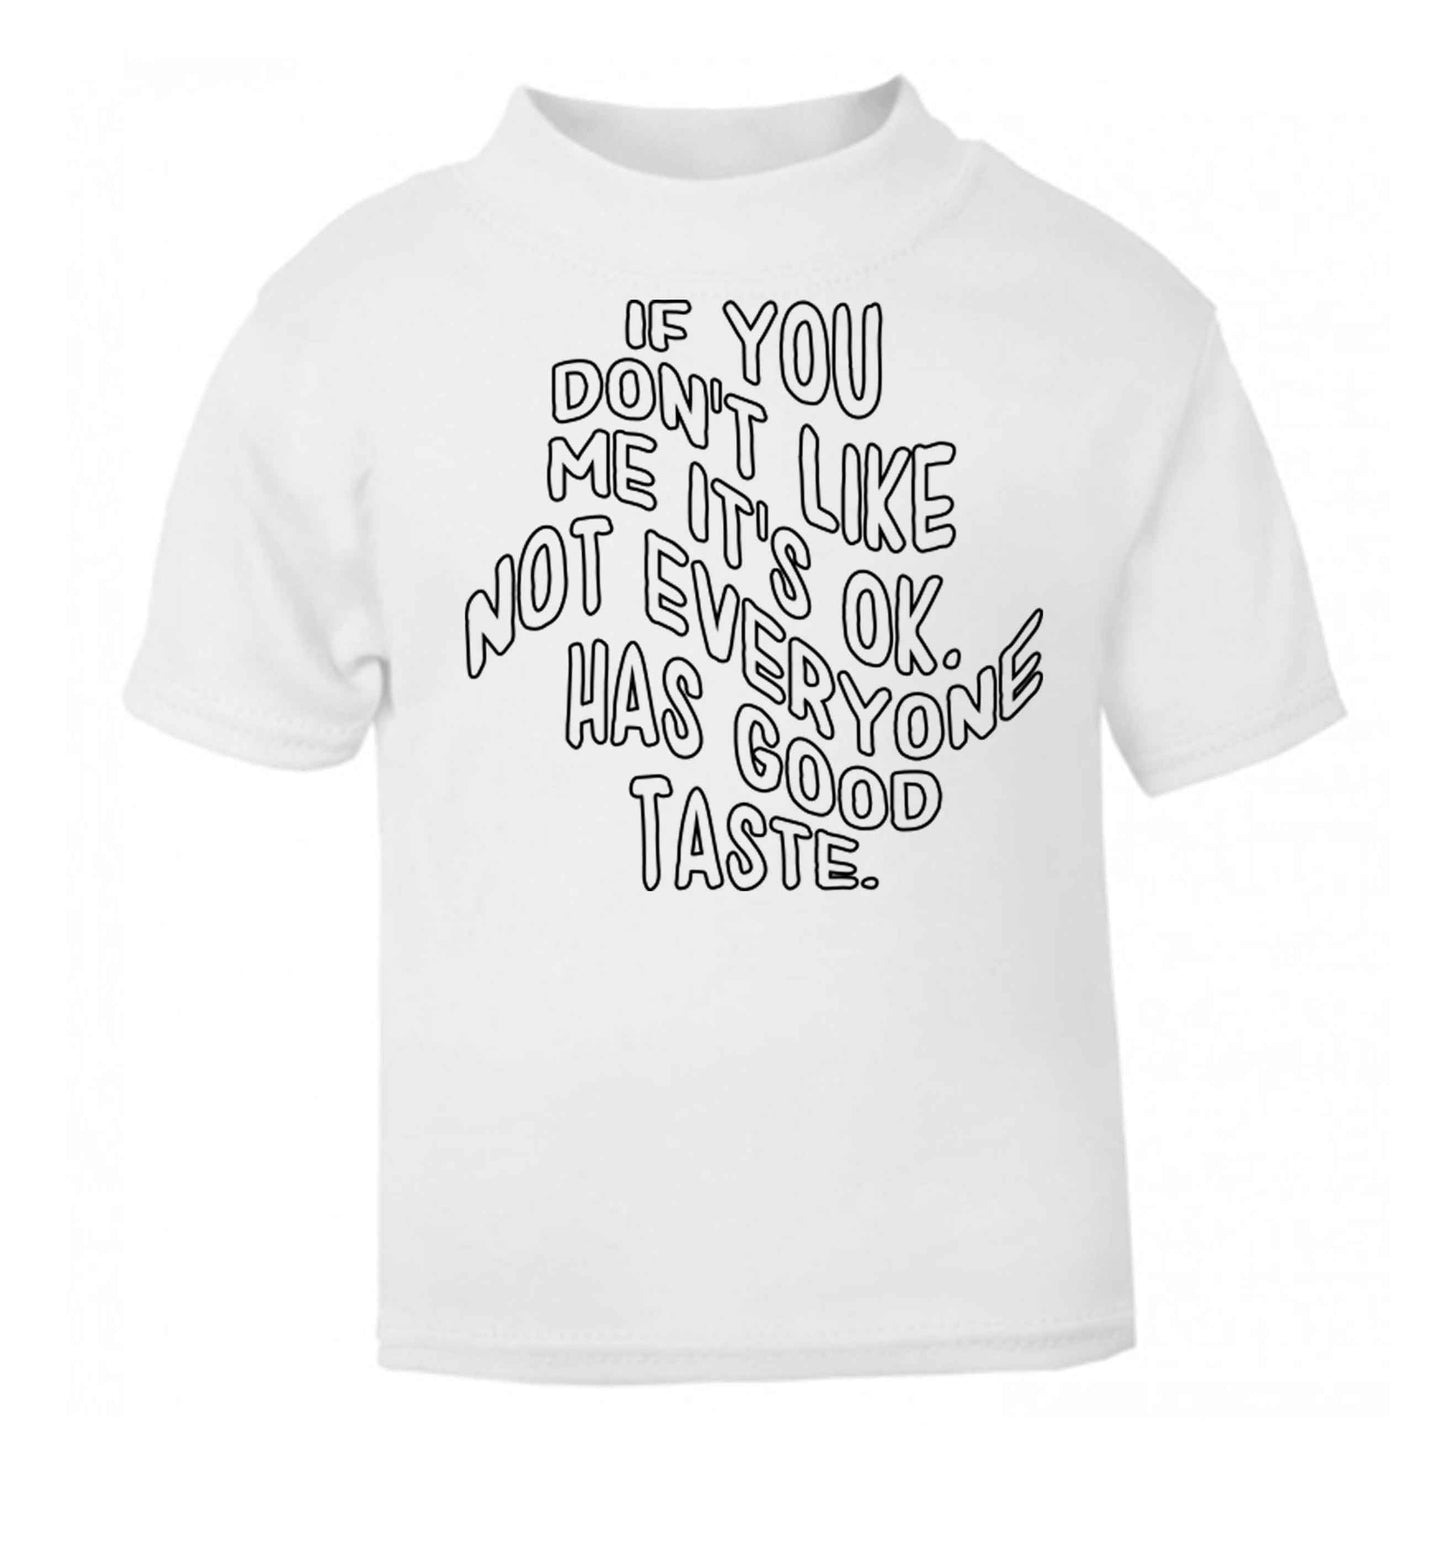 If you don't like me it's ok not everyone has good taste white baby toddler Tshirt 2 Years